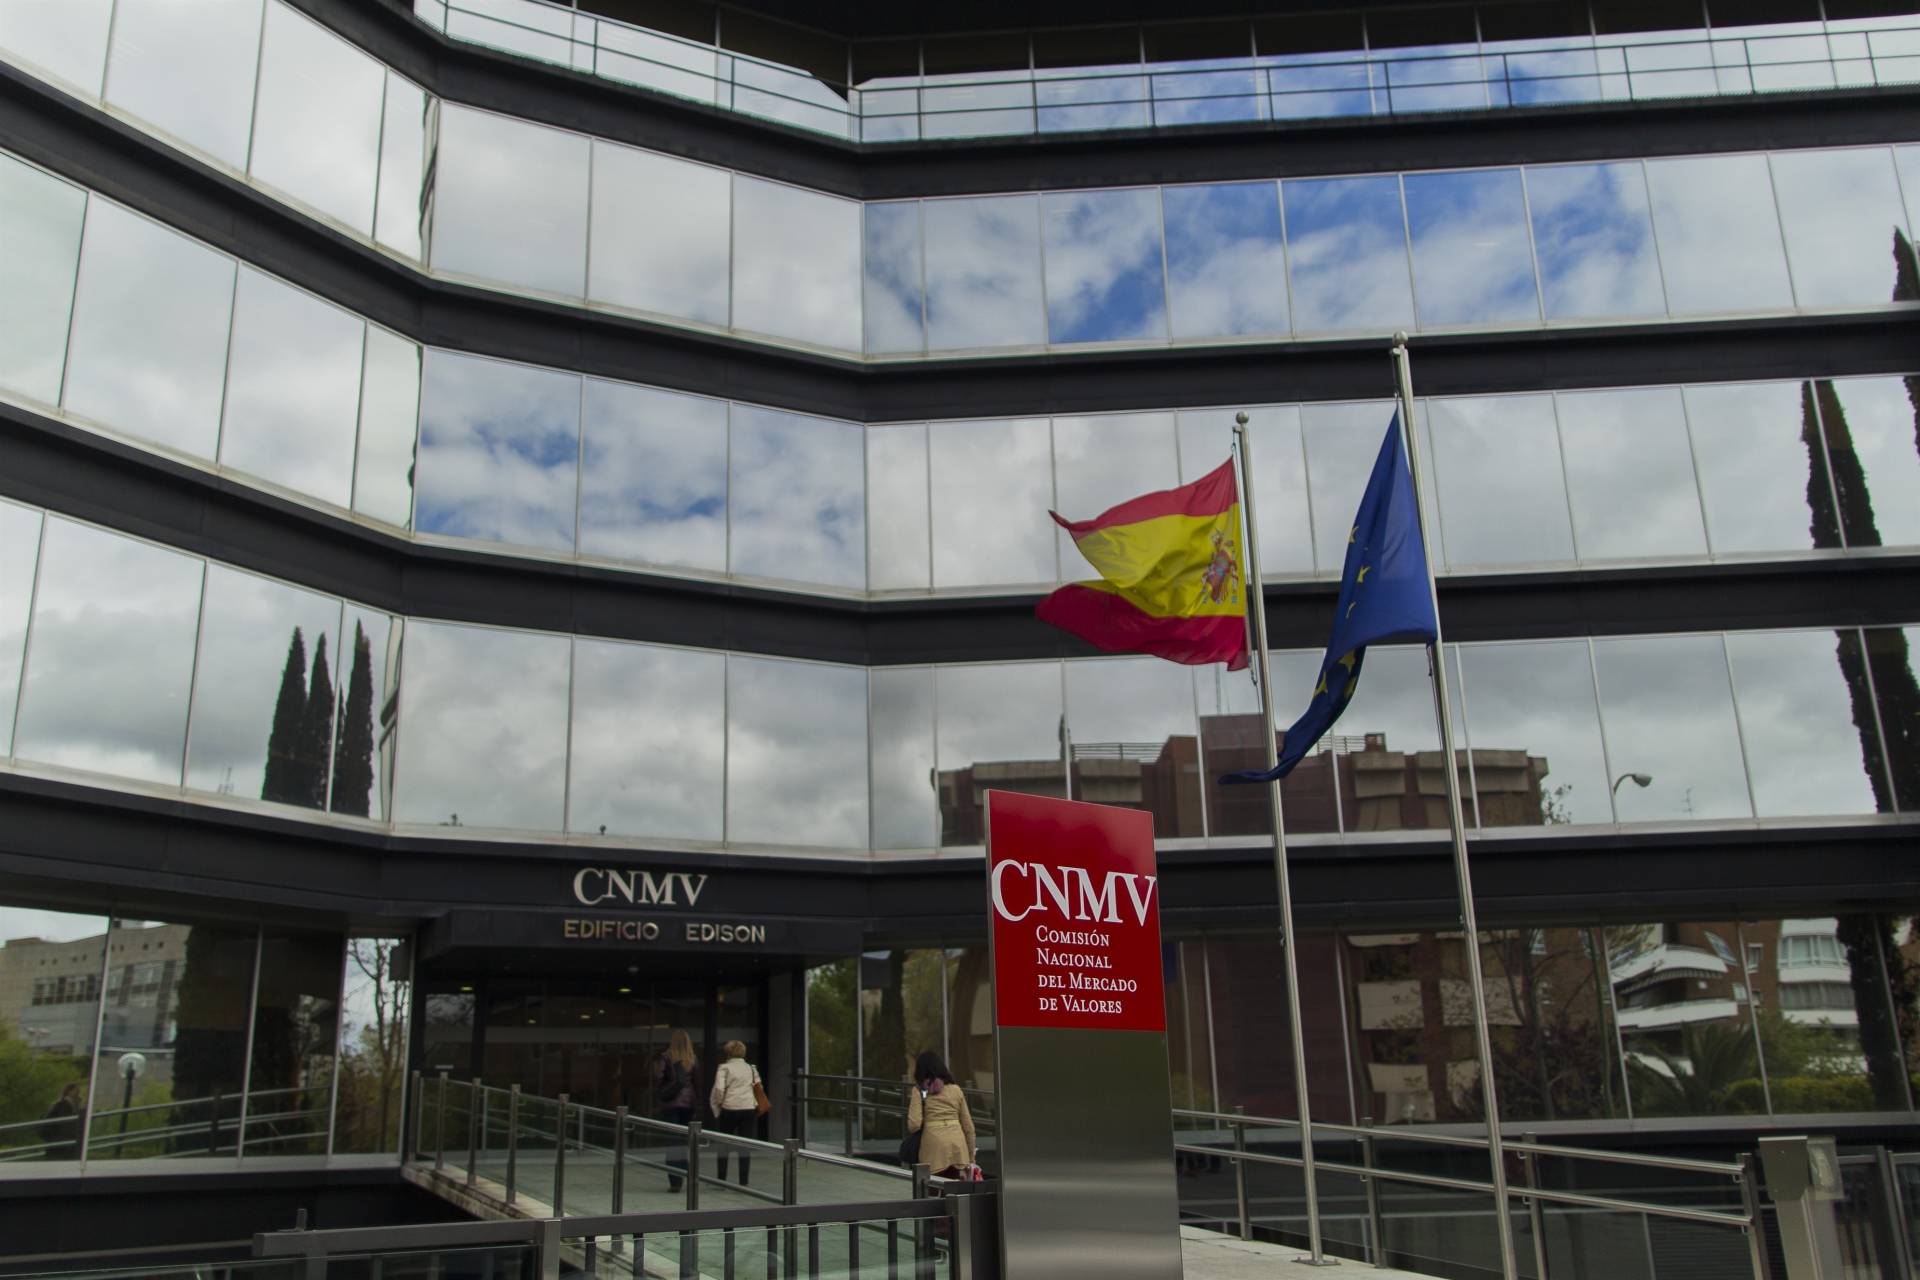 The CNMV of Spain requires search engine companies and social networks to control advertising to cryptocurrency platforms that are not registered